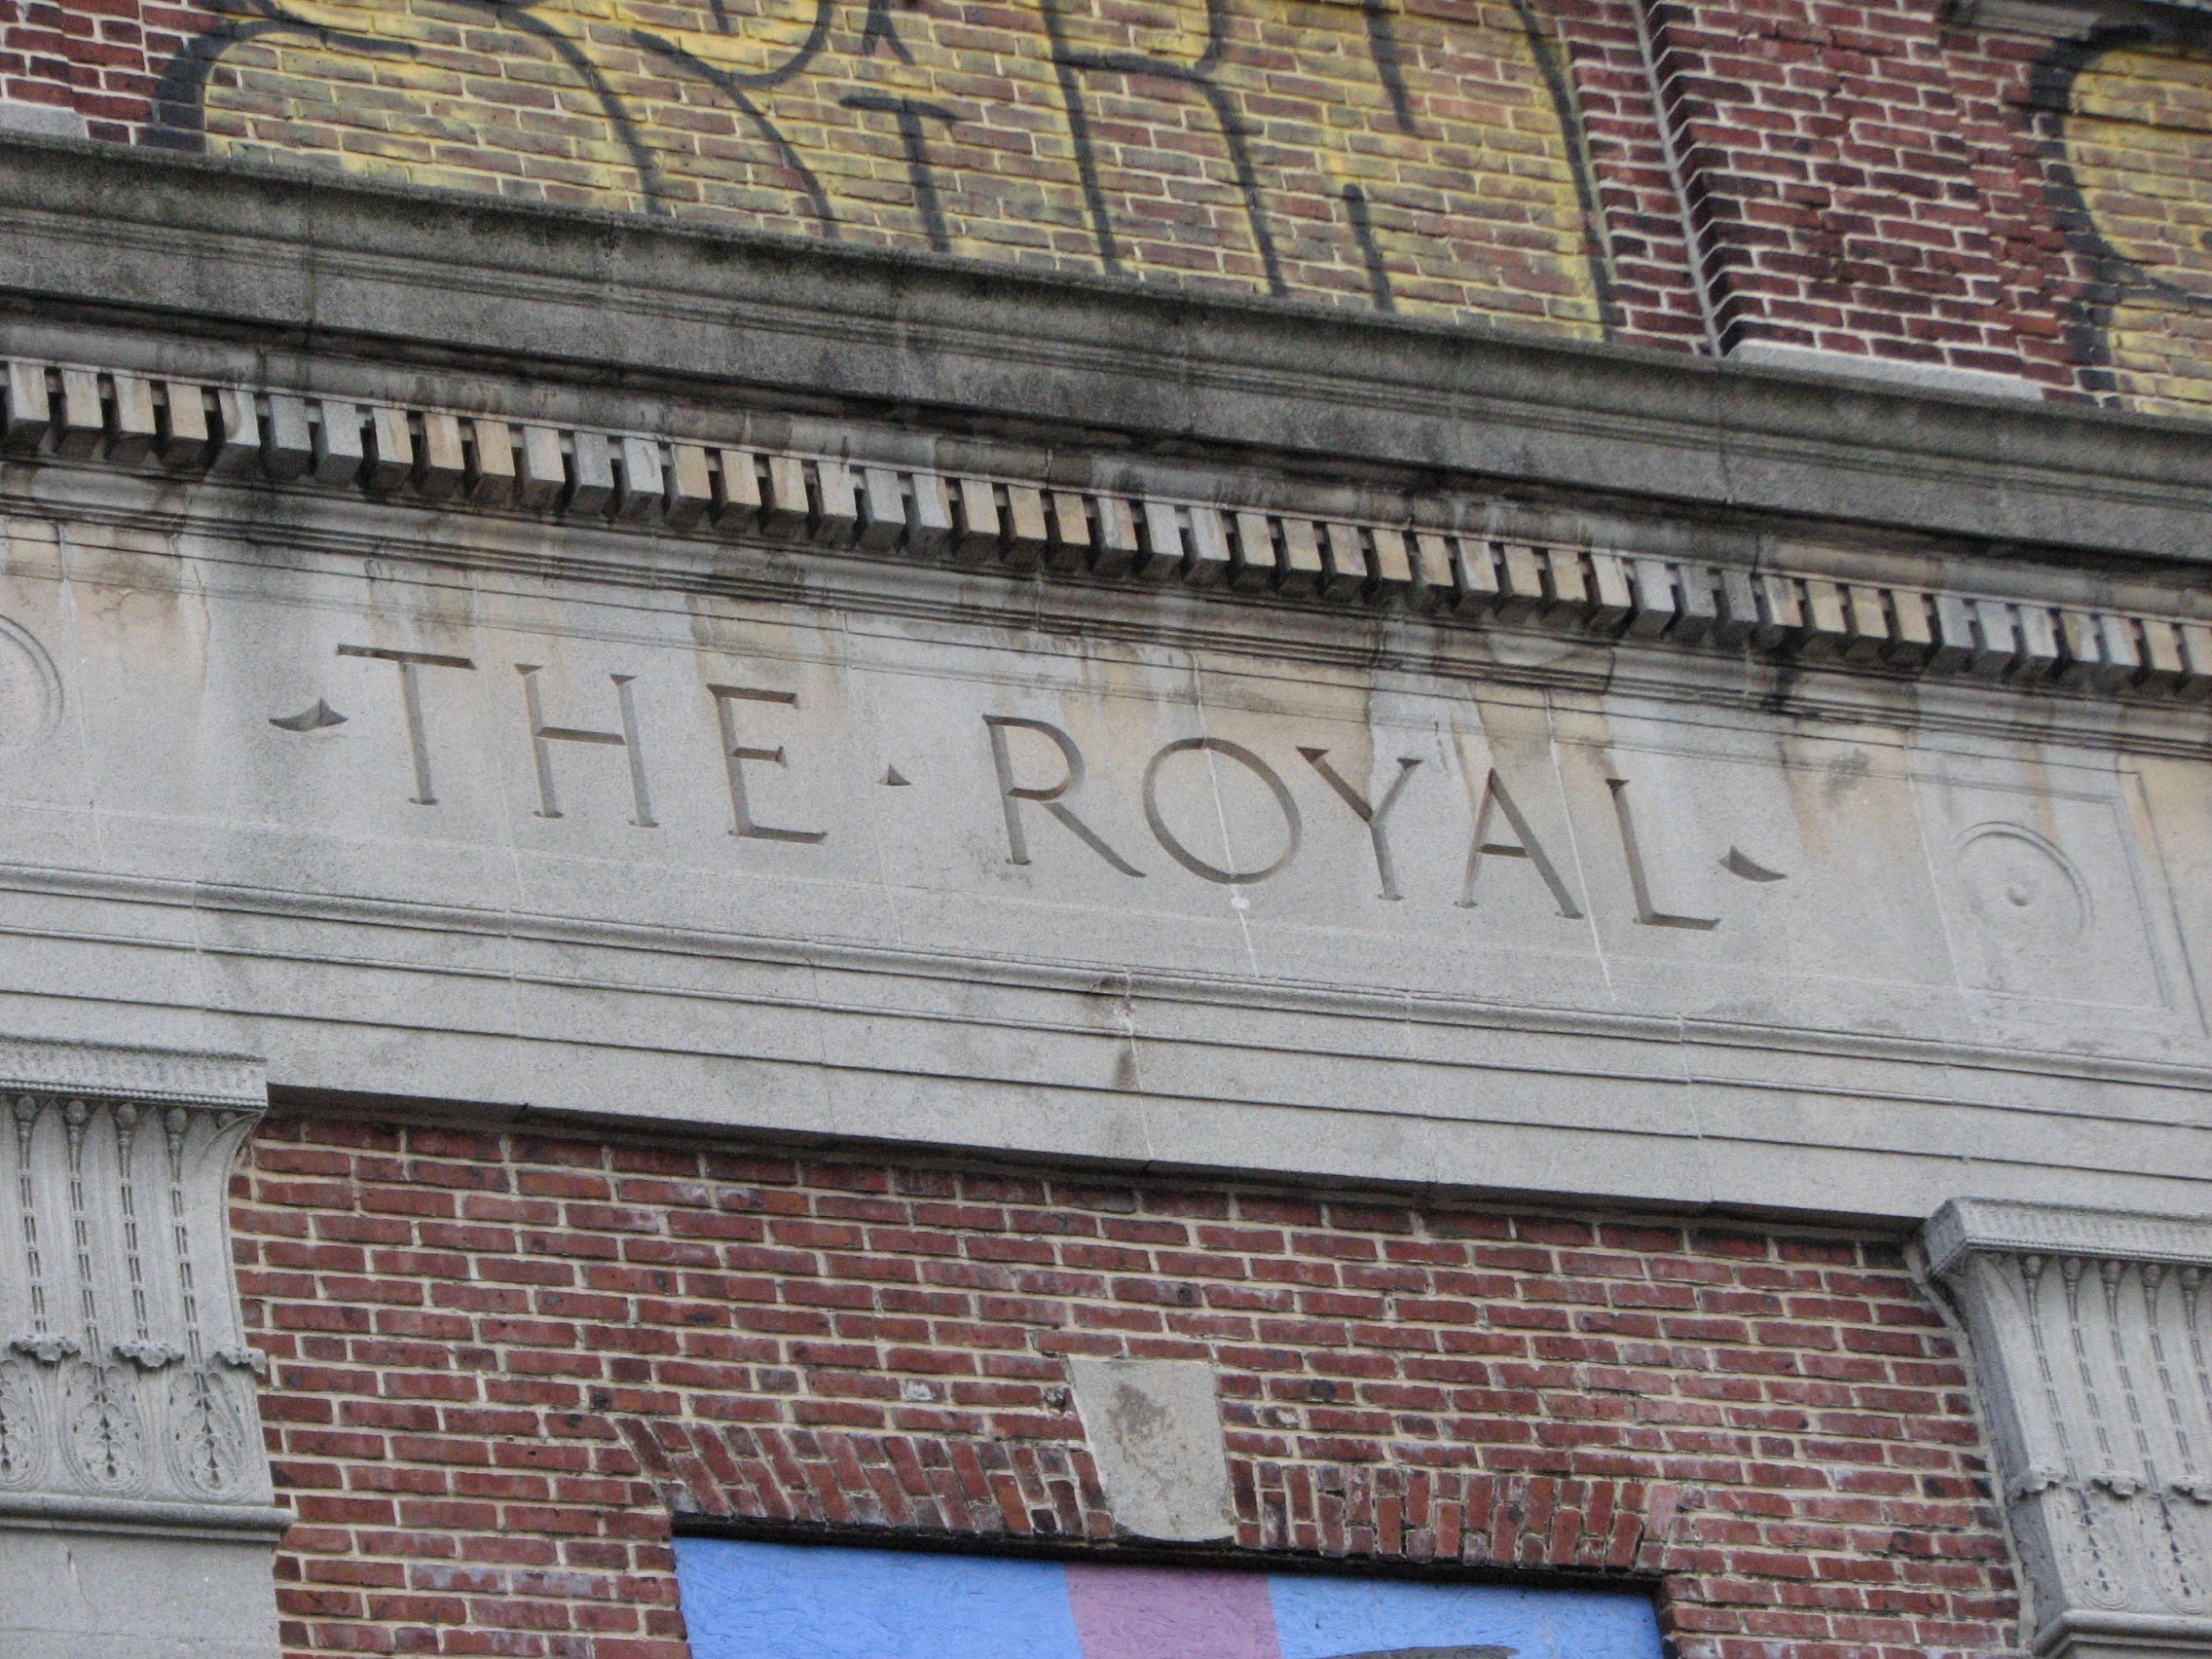 The Royal was once the queen of west South Street.